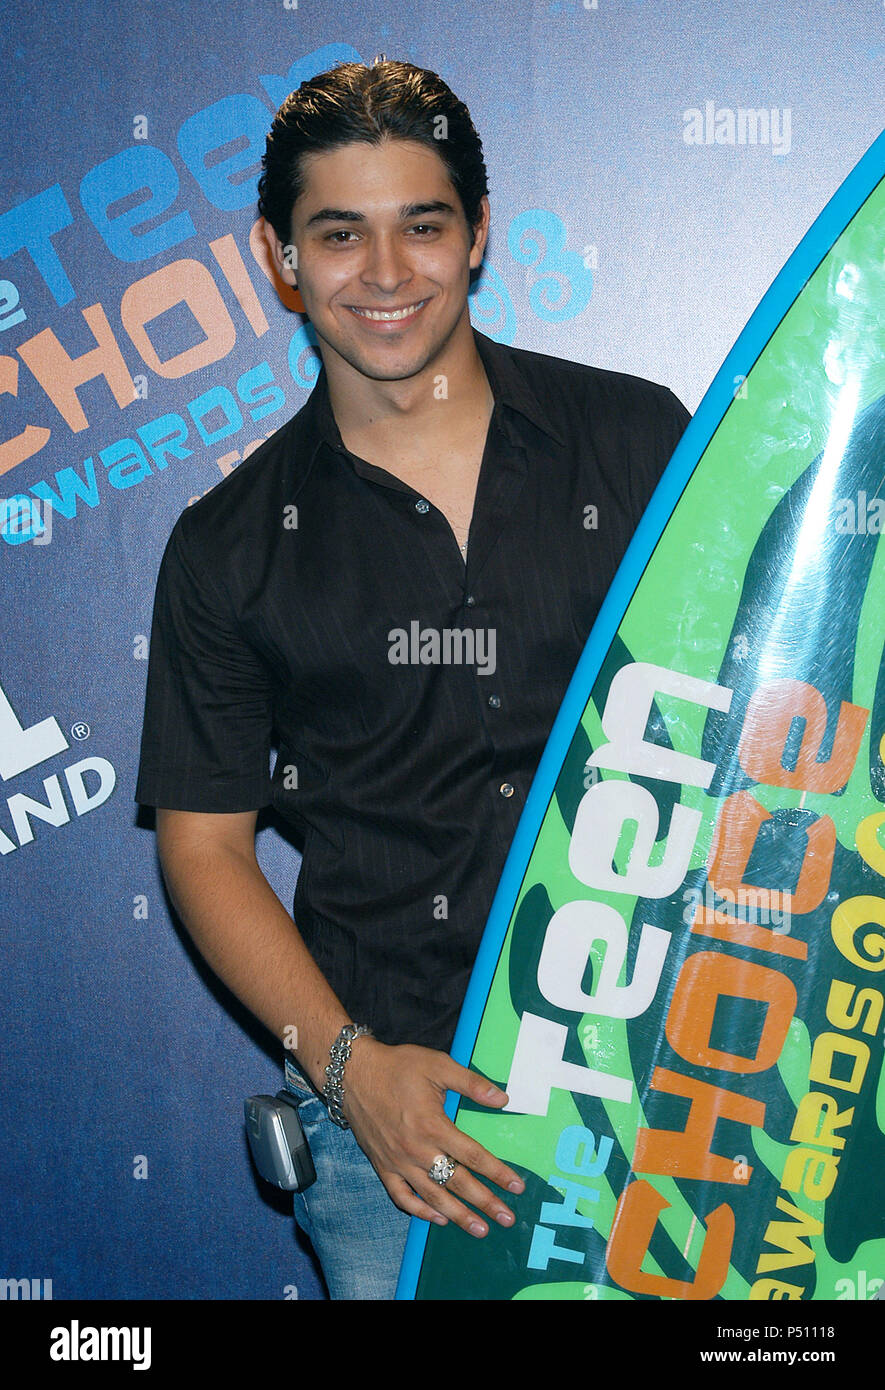 Wilmer Valderrama backstage at the ' Teen Choice Awards 2003 ' at the Universal Amphitheatre in Los Angeles. August 2, 2003.          -            ValderramaWilmer095.jpgValderramaWilmer095  Event in Hollywood Life - California, Red Carpet Event, USA, Film Industry, Celebrities, Photography, Bestof, Arts Culture and Entertainment, Topix Celebrities fashion, Best of, Hollywood Life, Event in Hollywood Life - California,  backstage trophy, Awards show, movie celebrities, TV celebrities, Music celebrities, Topix, Bestof, Arts Culture and Entertainment, Photography,    inquiry tsuni@Gamma-USA.com  Stock Photo